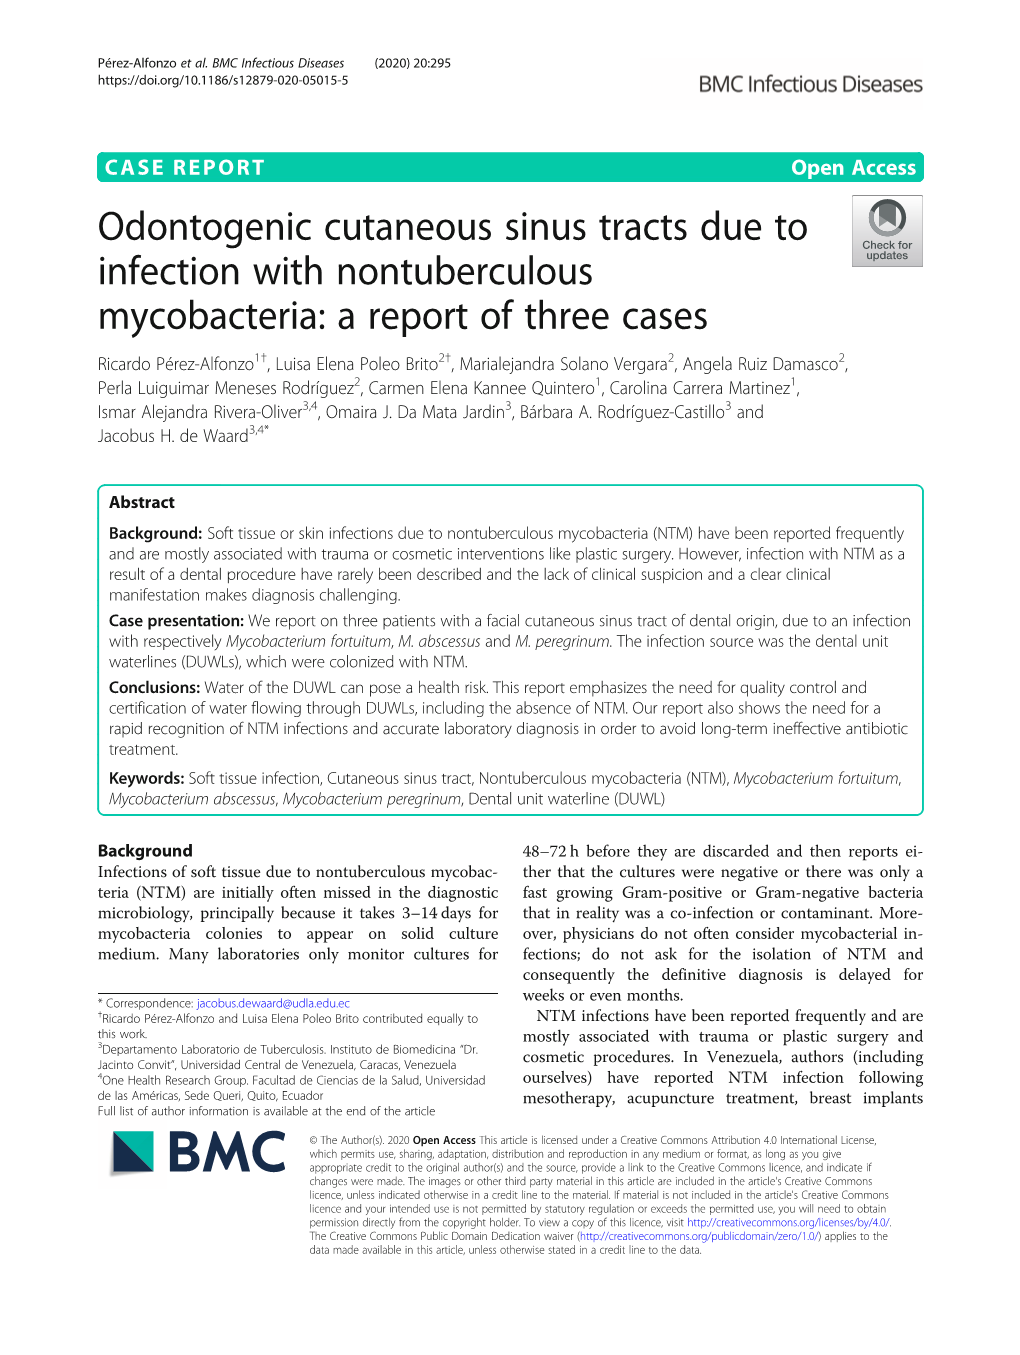 Odontogenic Cutaneous Sinus Tracts Due to Infection With